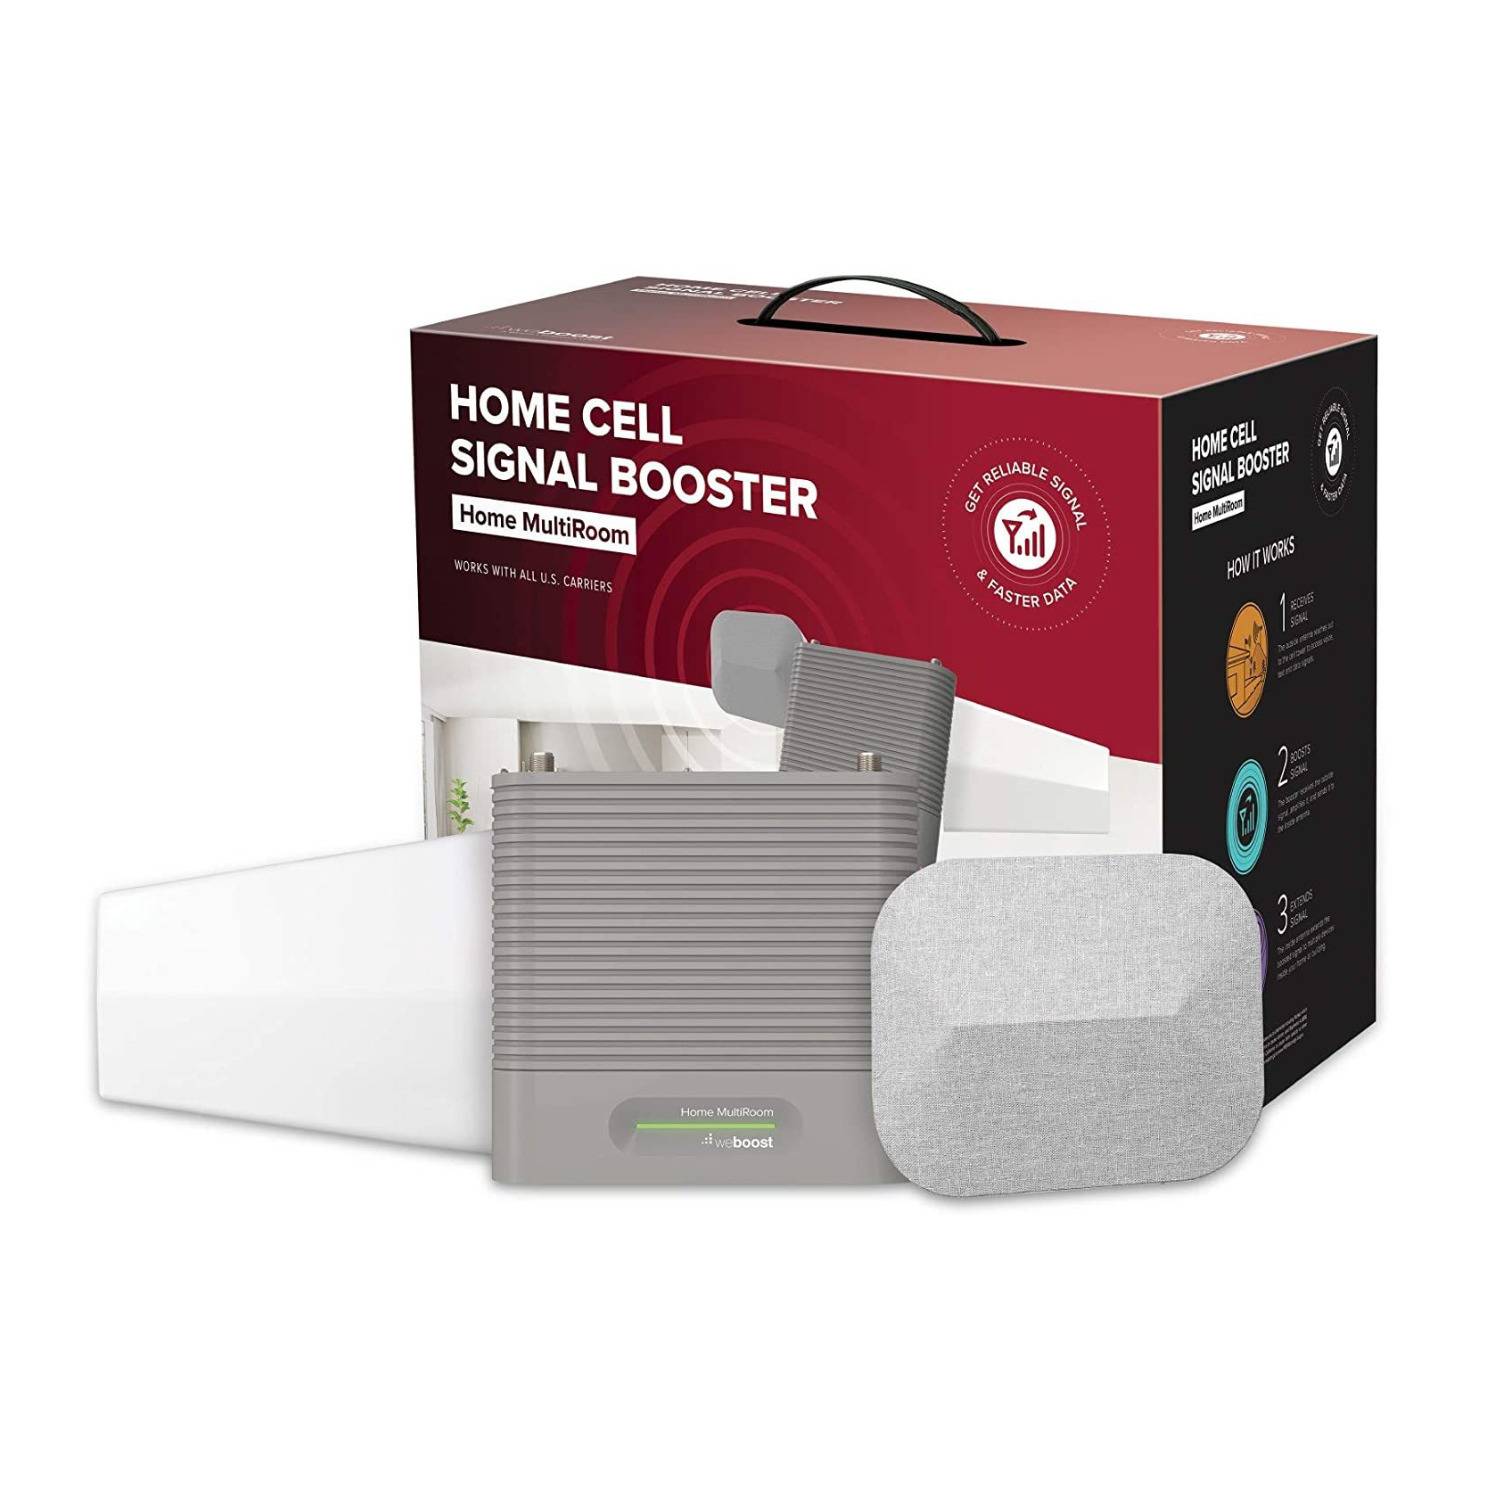 weBoost Home MultiRoom Cell Phone Signal Booster